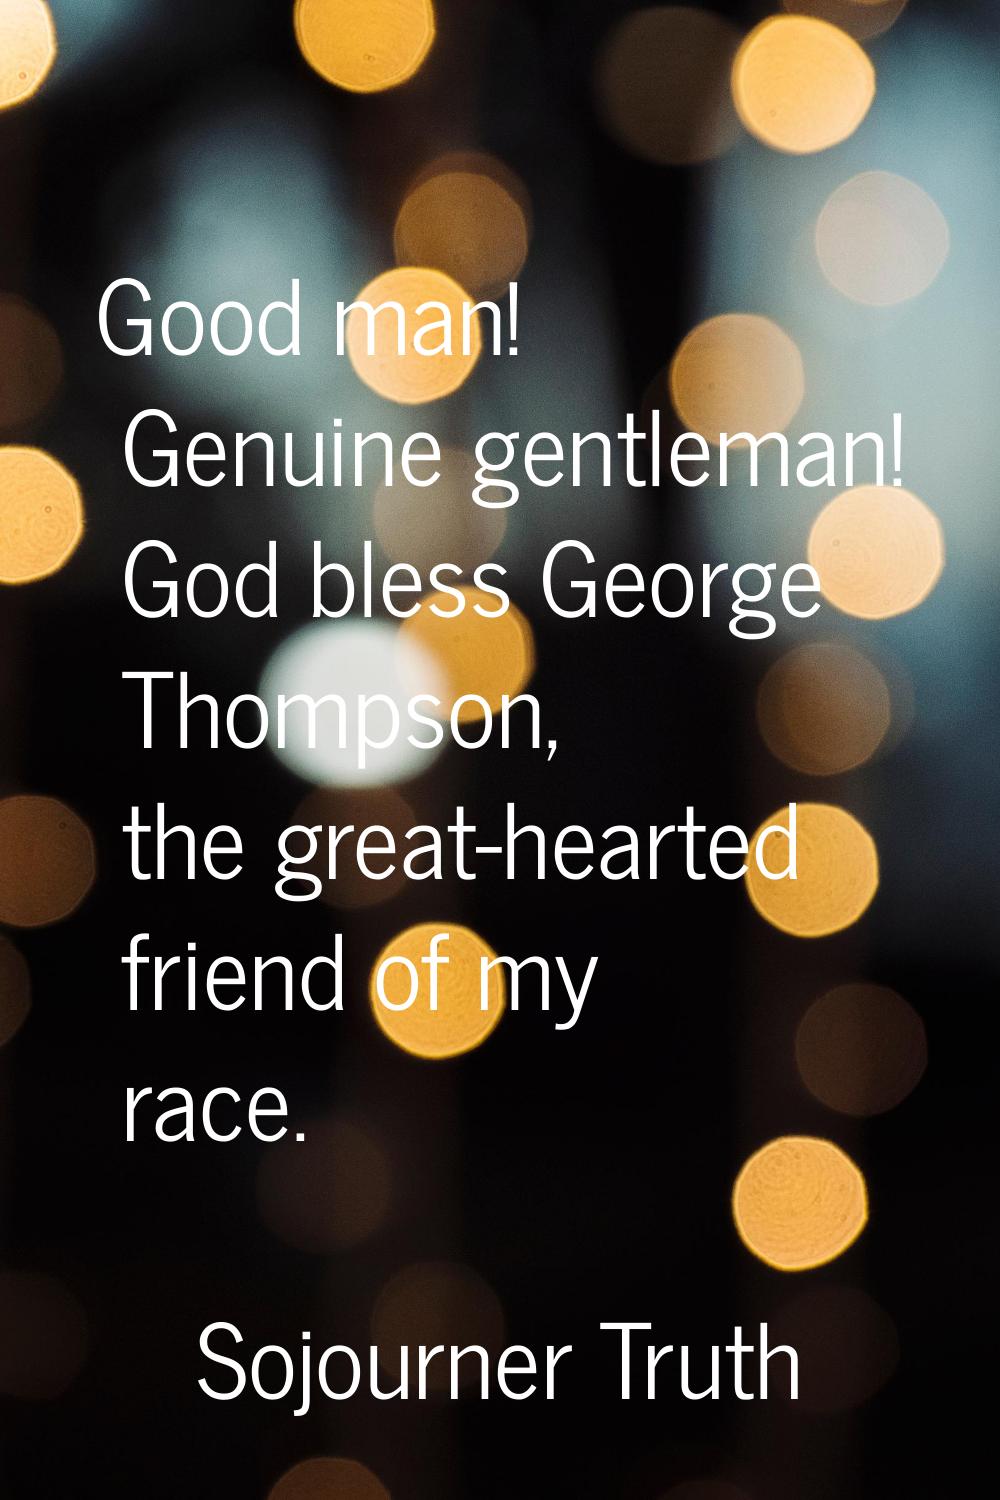 Good man! Genuine gentleman! God bless George Thompson, the great-hearted friend of my race.